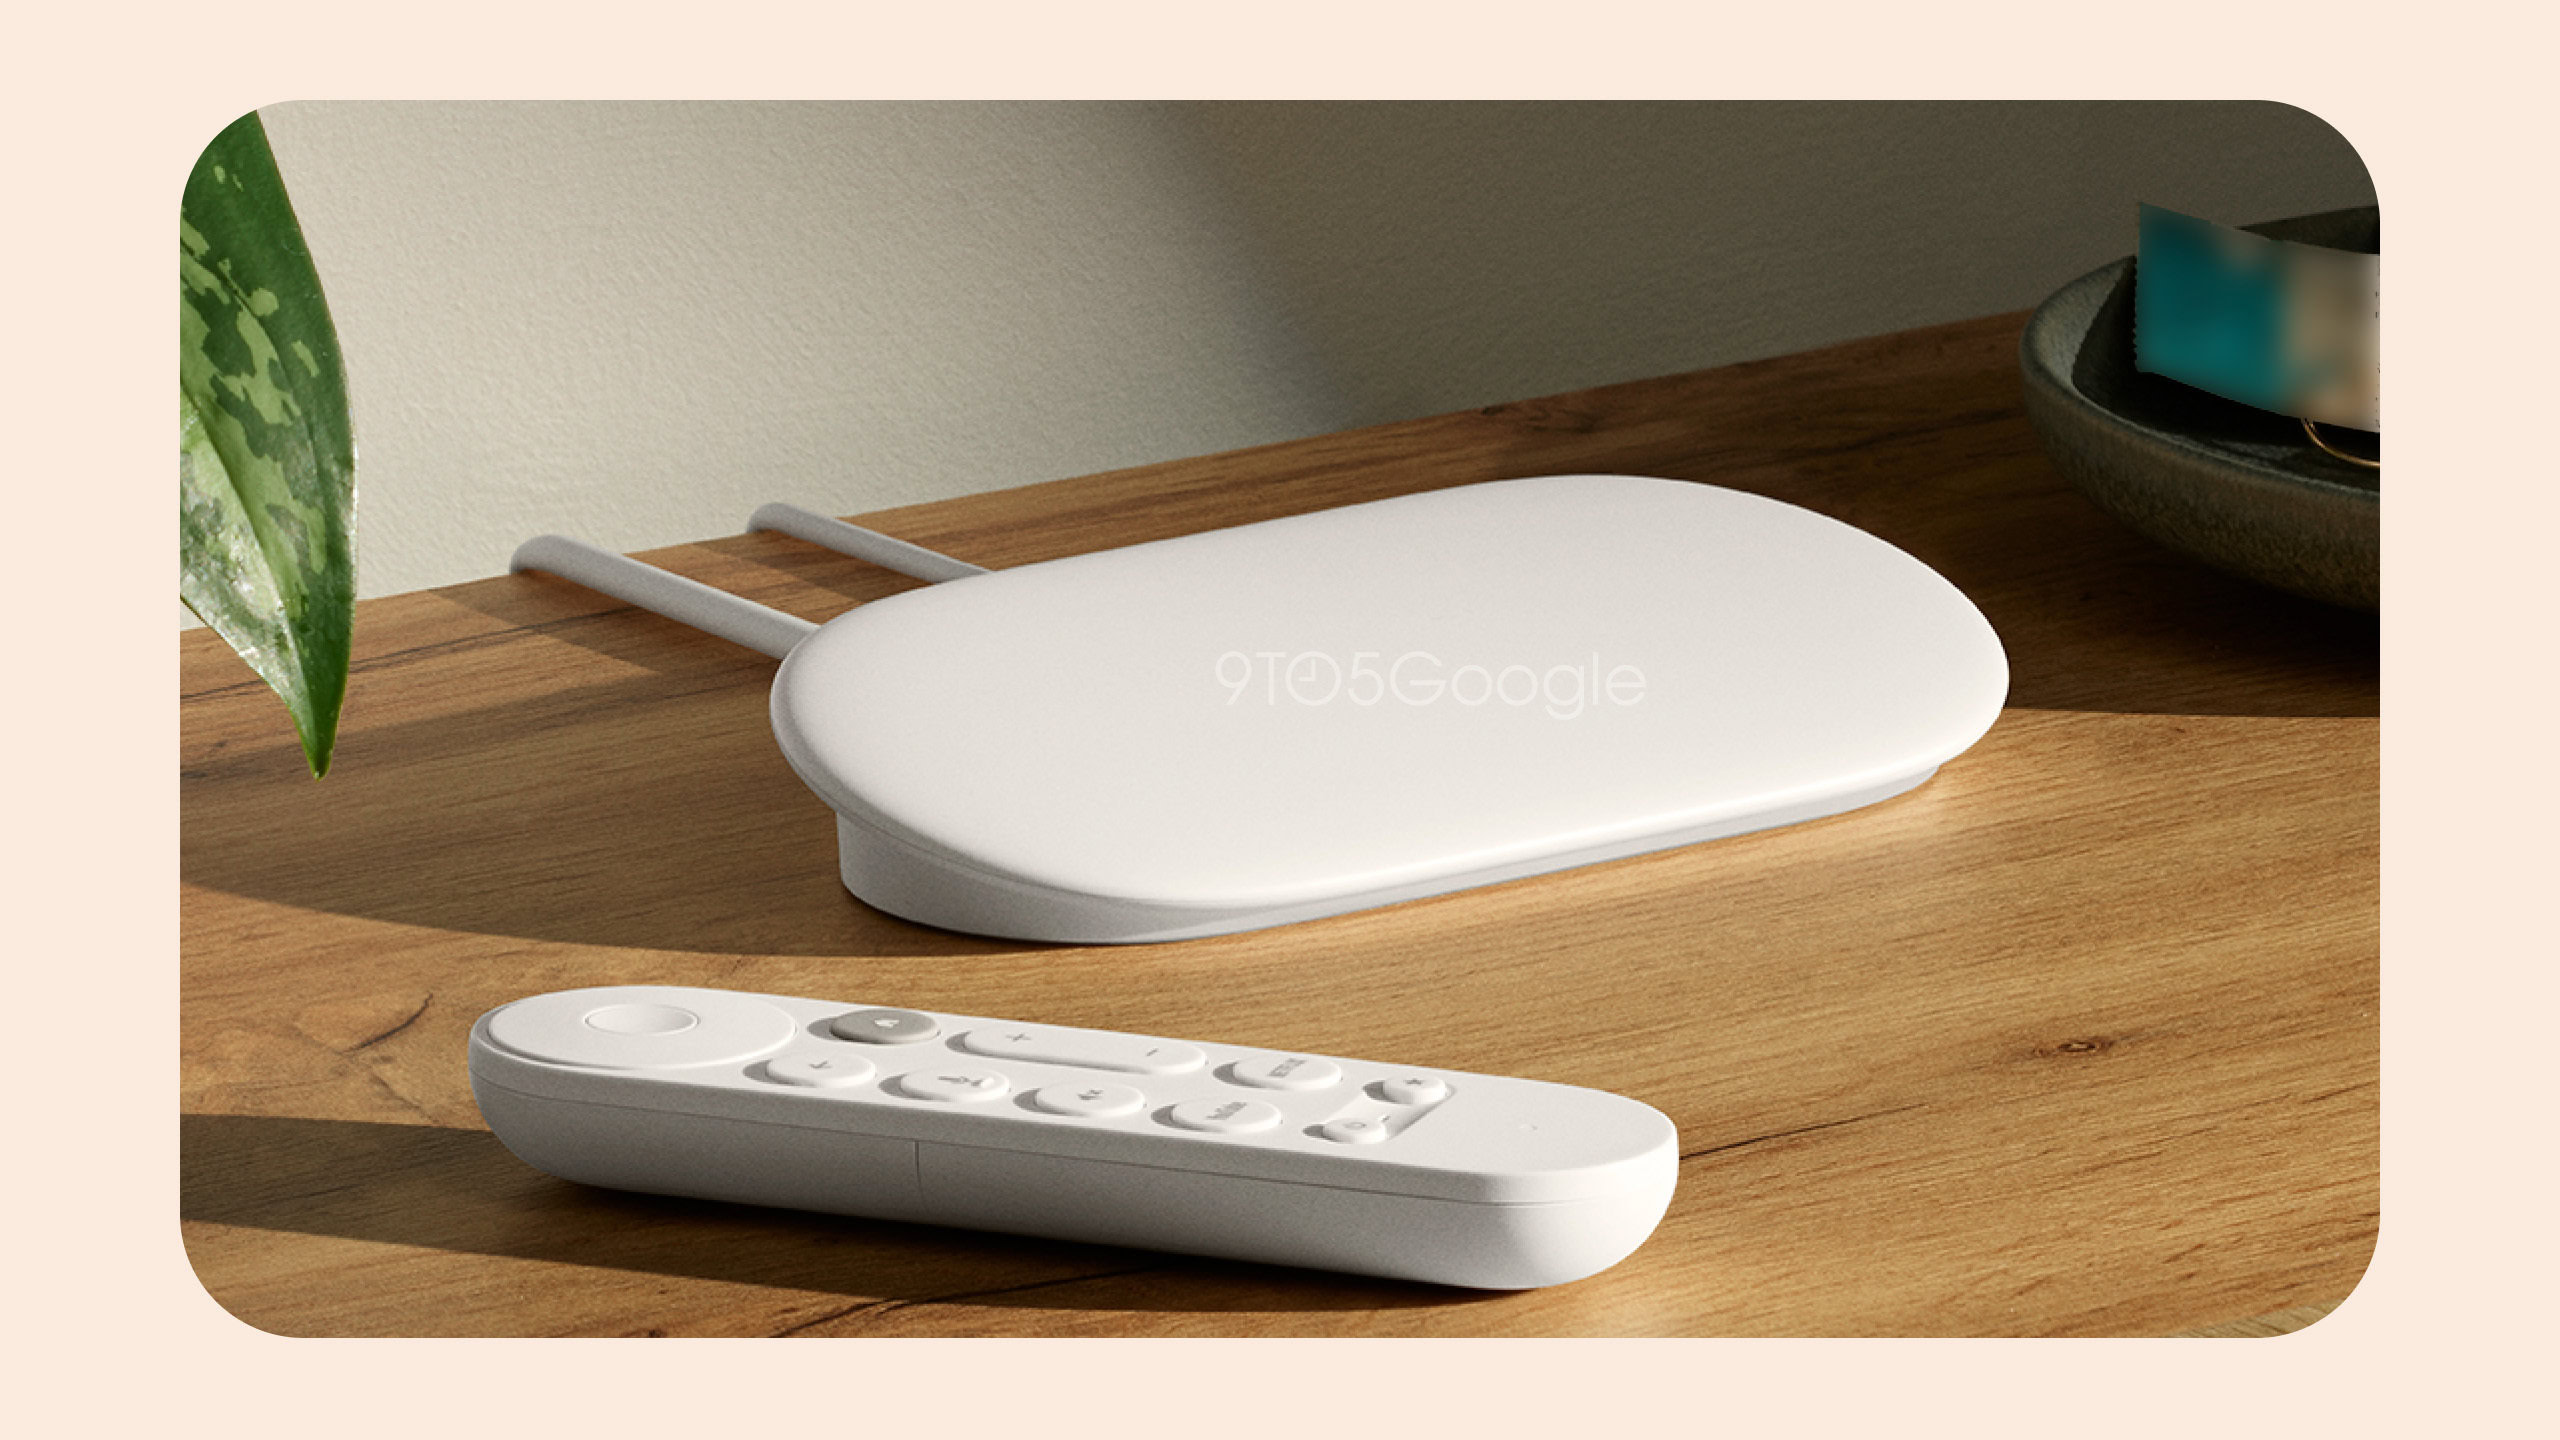 Here’s more info on the ‘Google TV Streamer,’ including possible Ethernet support